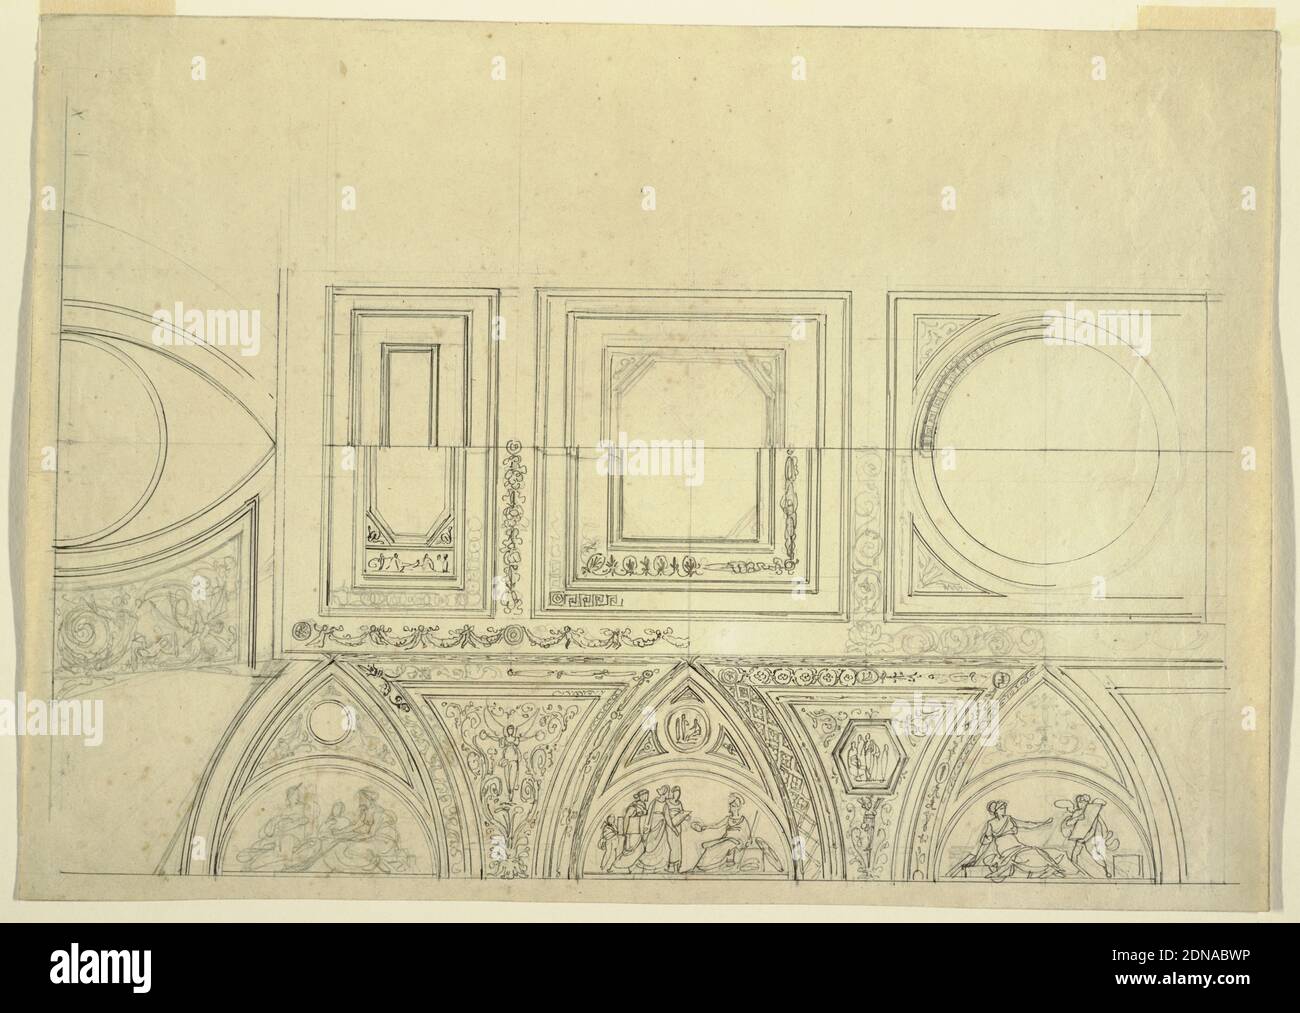 Vaulted Ceiling with Alternative Designs, Felice Giani, Italian, 1758–1823, Pen and ink over traces of graphite on greyish laid paper, Row of big coffers of various design, supported by pointed arches separated by spandrels. Representations in lunettes, at bottom of arches, reference to Athena as protector of arts. Candelabrum motifs in spandrels., Italy, ca. 1750, Drawing Stock Photo